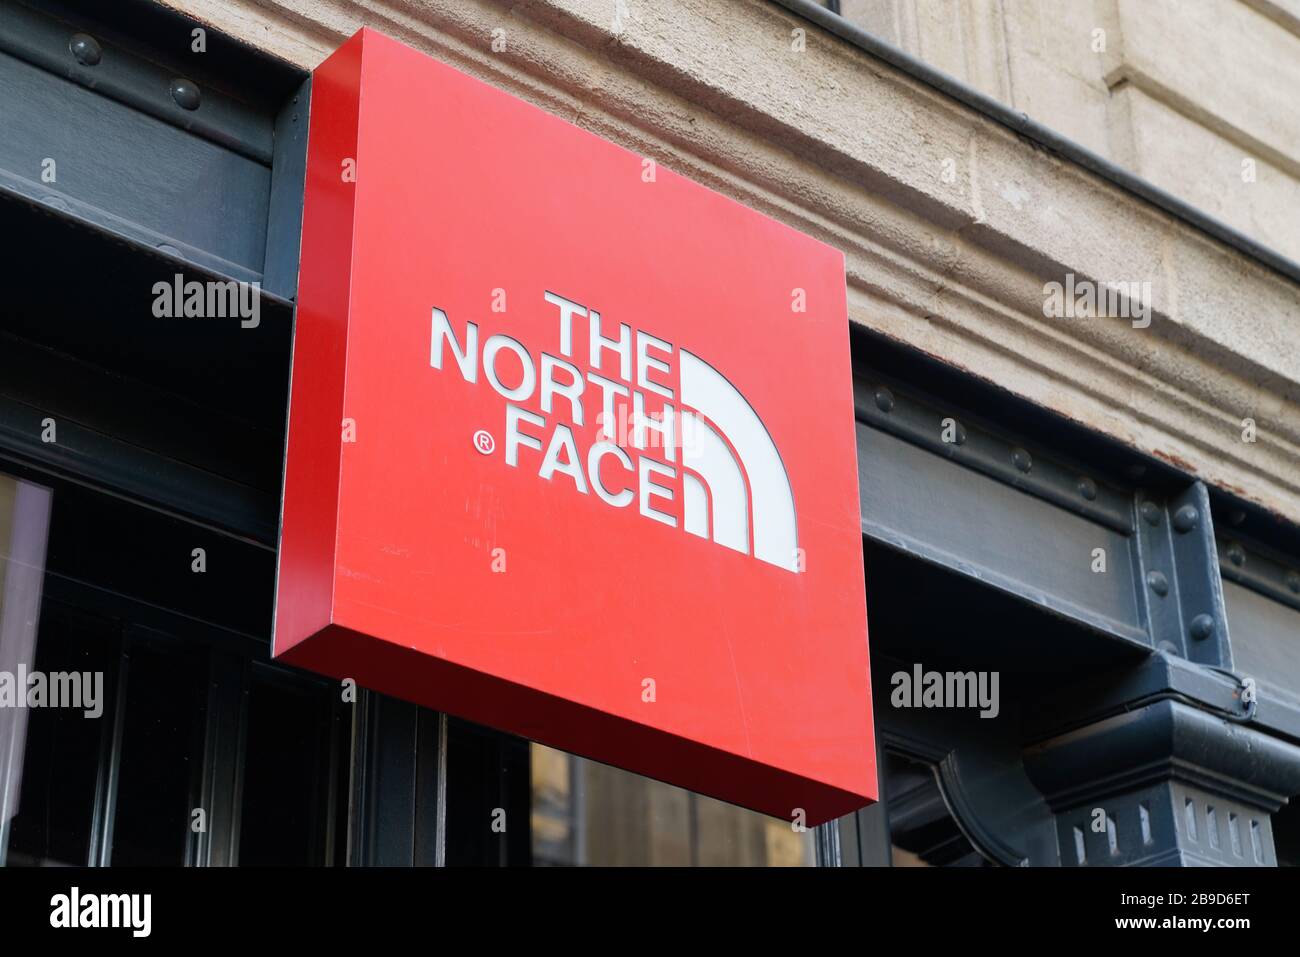 Bordeaux , Aquitaine / France - 10 06 2019 : The North Face logo shop above  the entrance to retail clothes store Stock Photo - Alamy